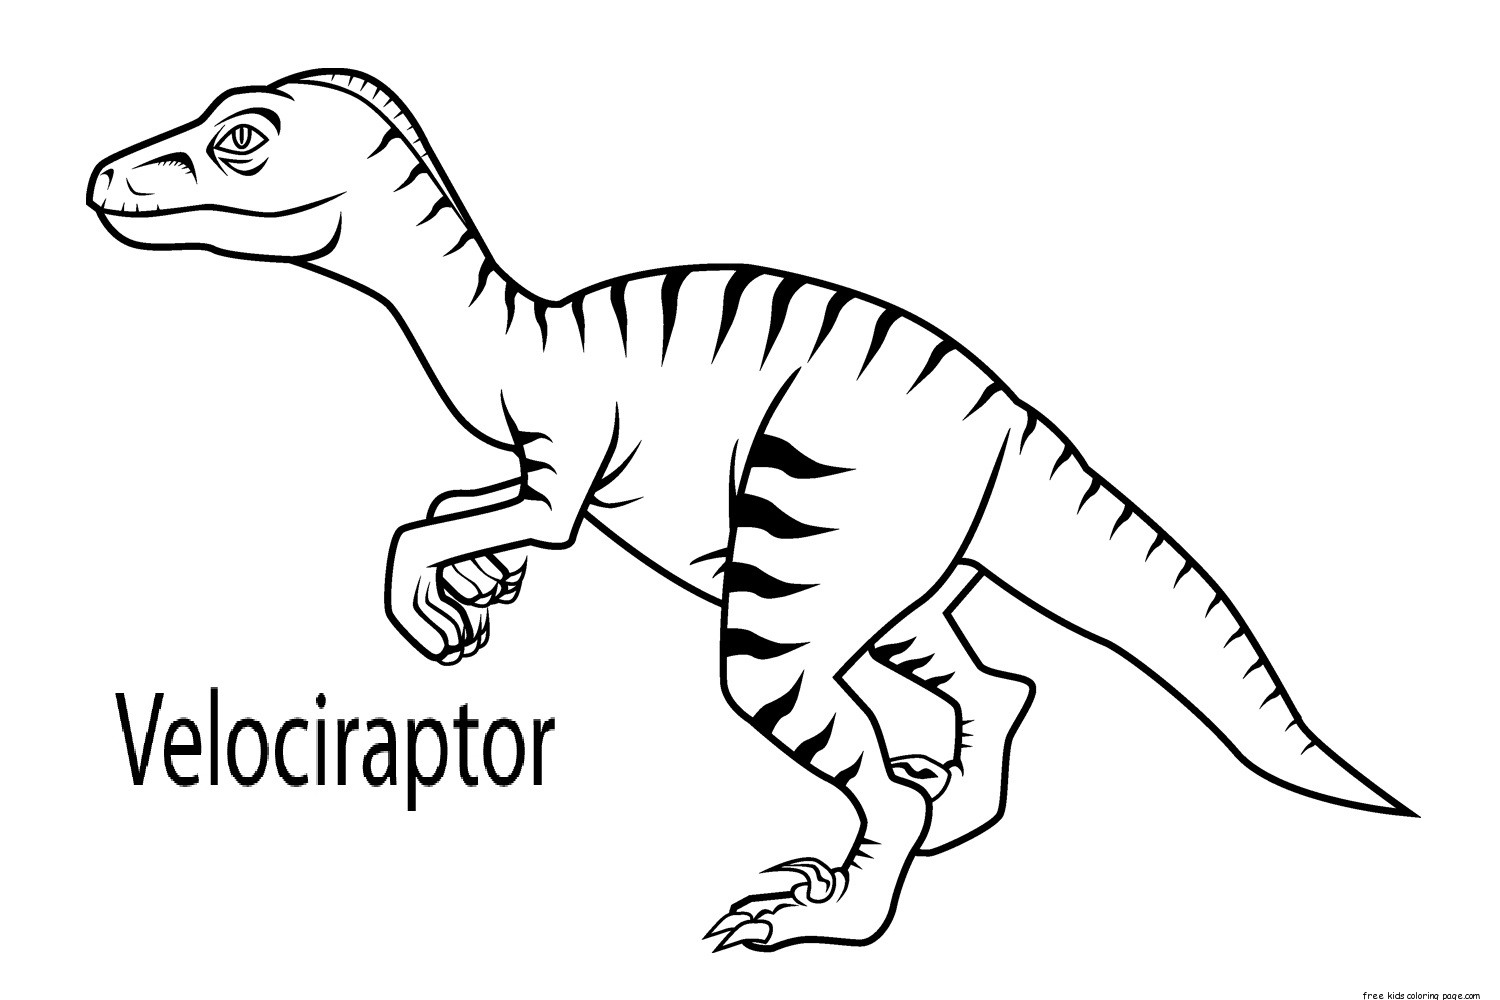 Printable velociraptor dinosaur coloring book pages for ...